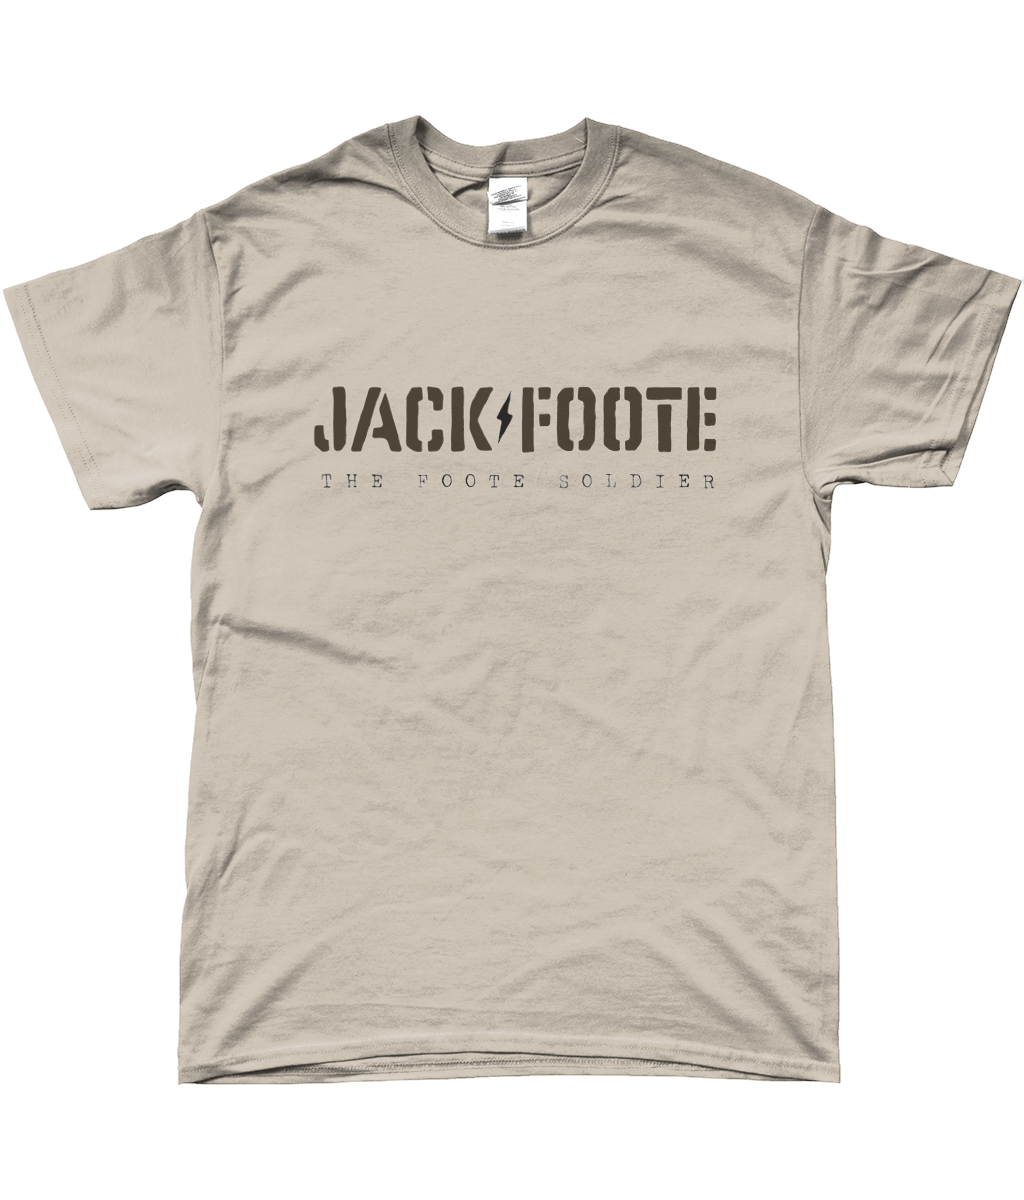 Jack Foote T-Shirt (White&Yellow)